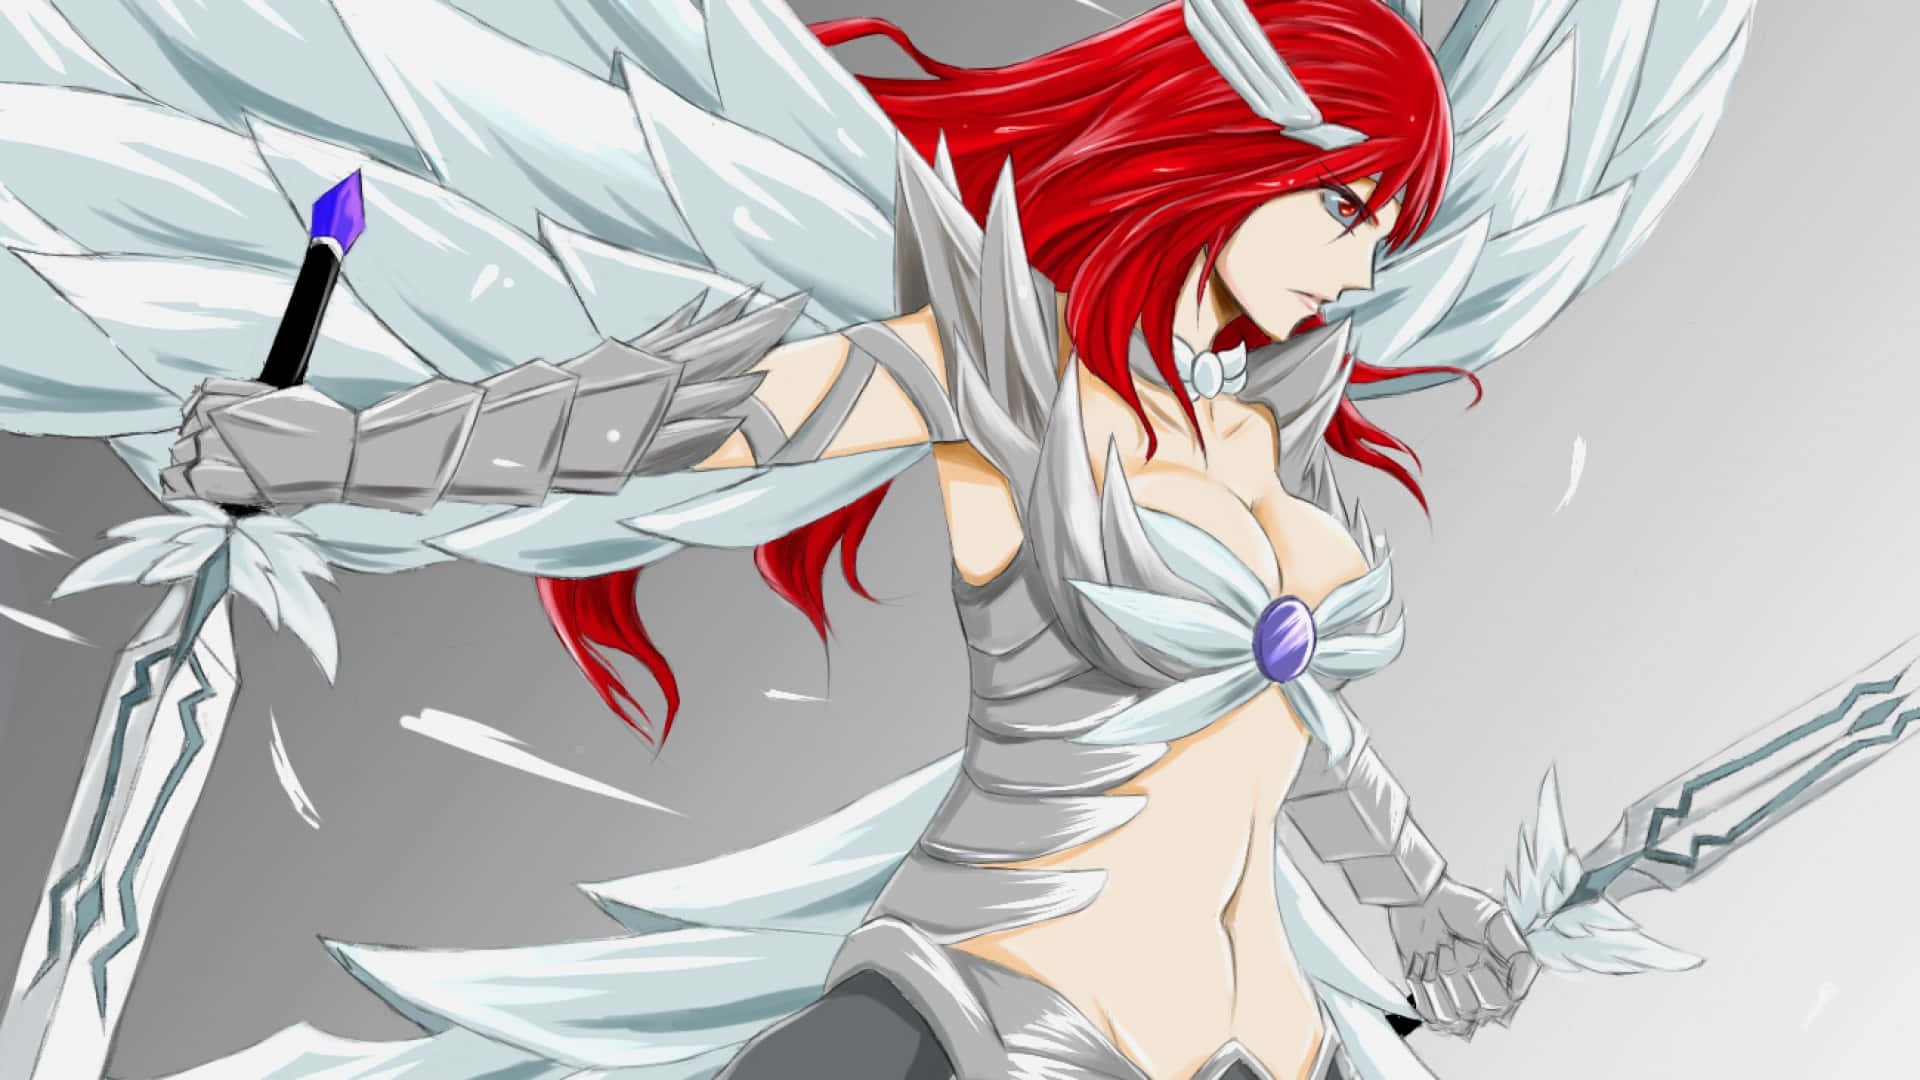 Witness the stunning power of Erza Scarlet" Wallpaper